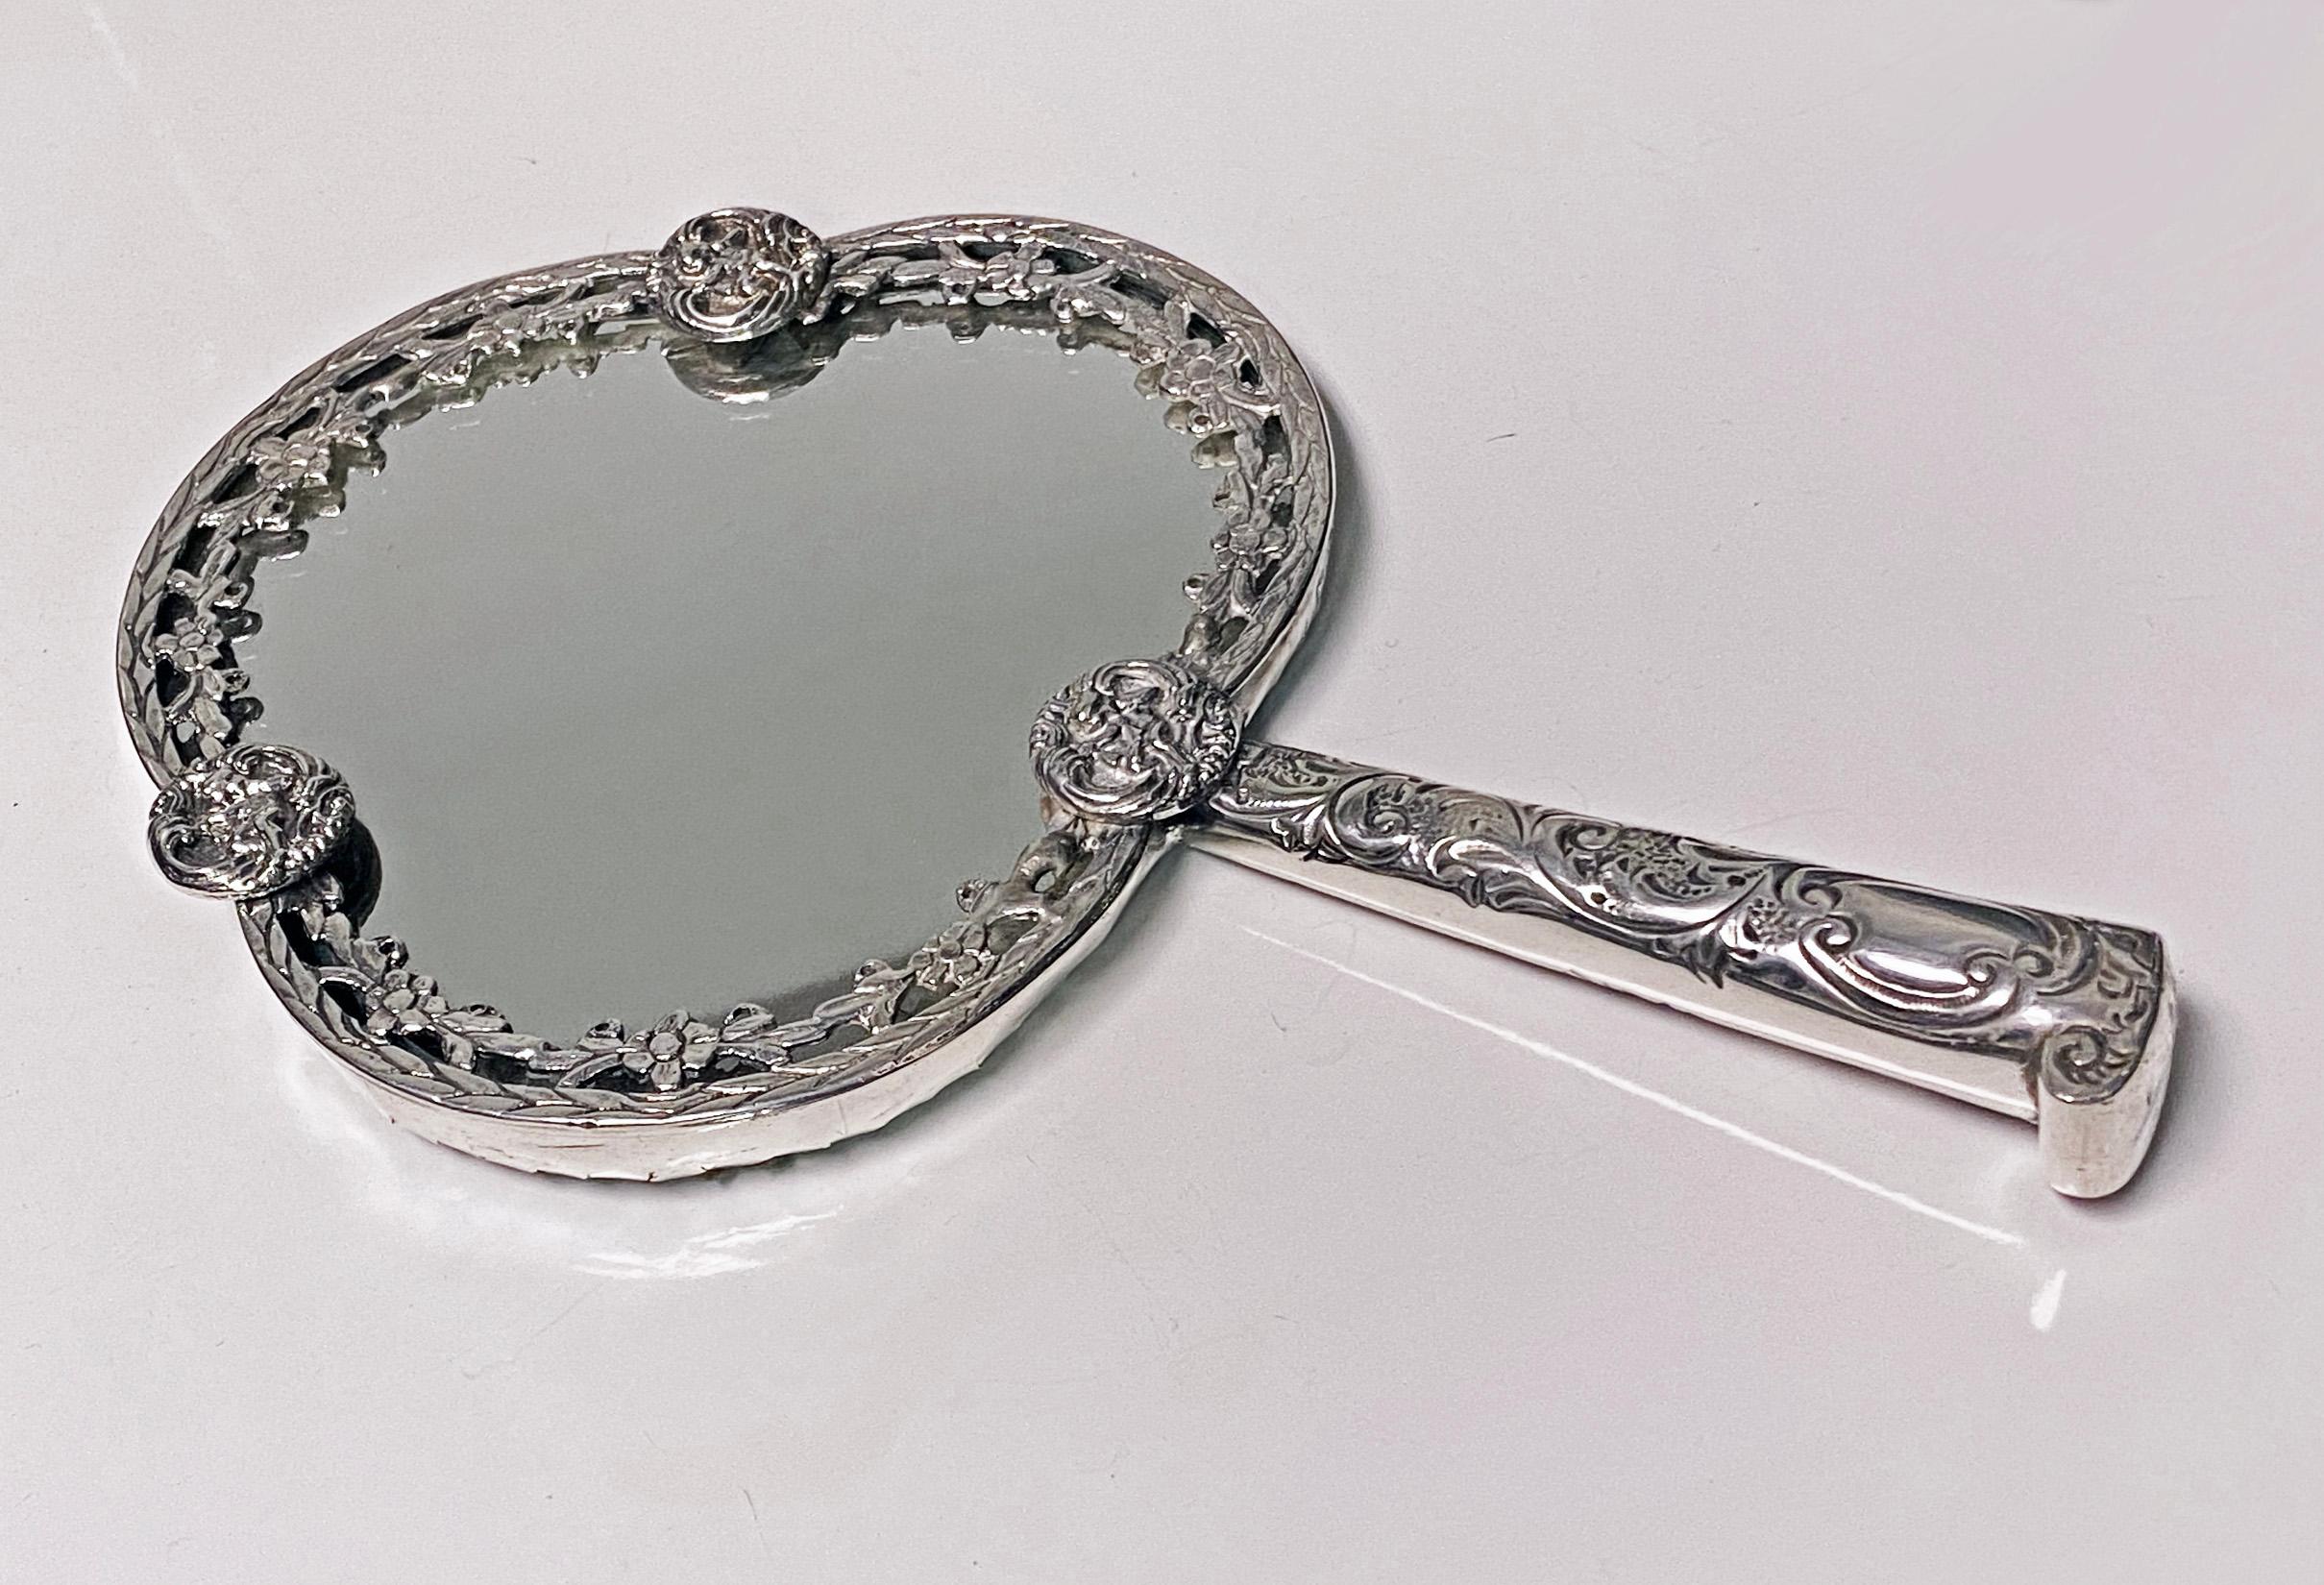 Unusual Antique silver hand mirror, London,1880, Robert Humphries. The front of frame designed with intervals of cherub cupids amidst rosette foliage border, the parasol style handle with foliage decoration. Length: 8.5 inches. Width: 5.1 inches.